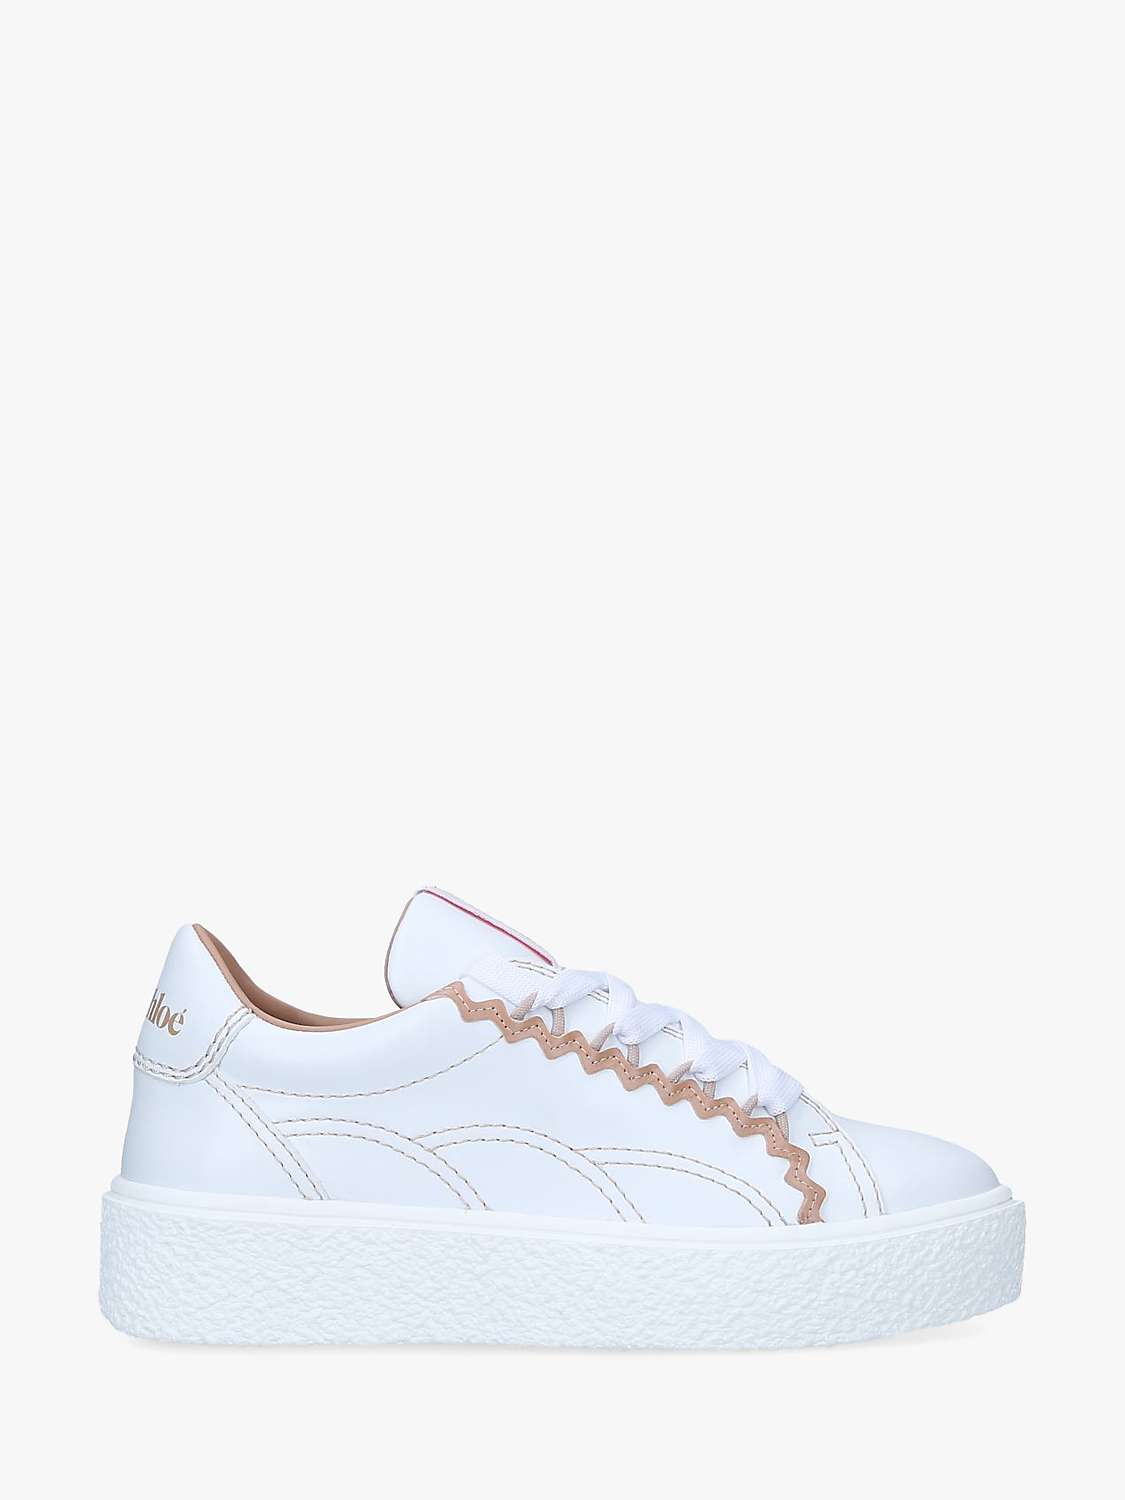 Buy See by Chloé Sevy Low Top Leather Trainers, White/Multi Online at johnlewis.com